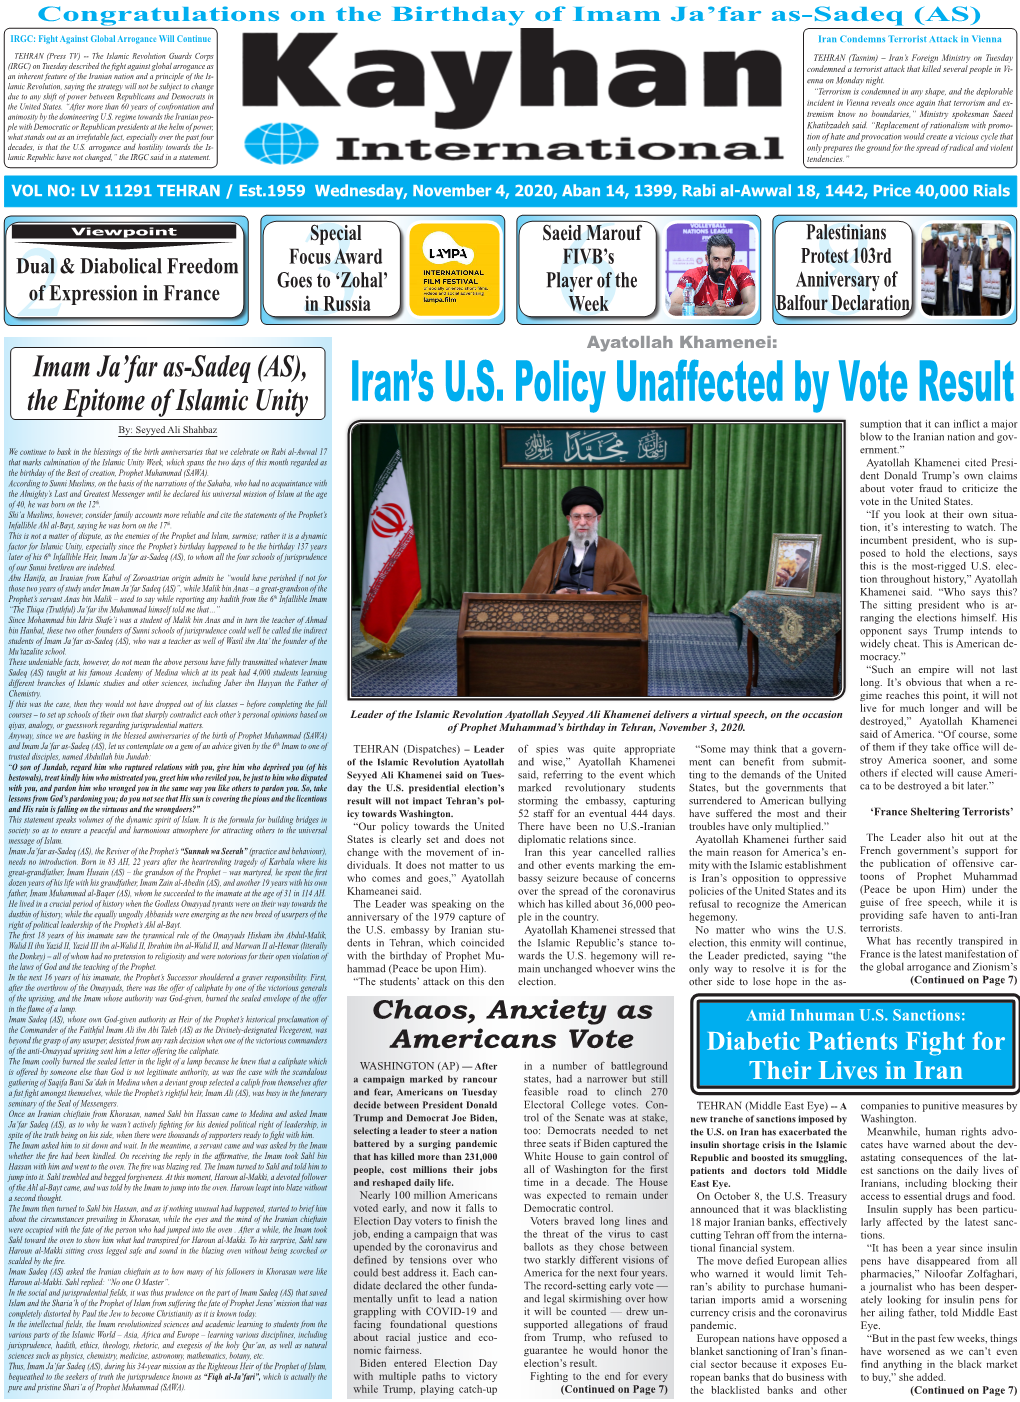 Iran's U.S. Policy Unaffected by Vote Result